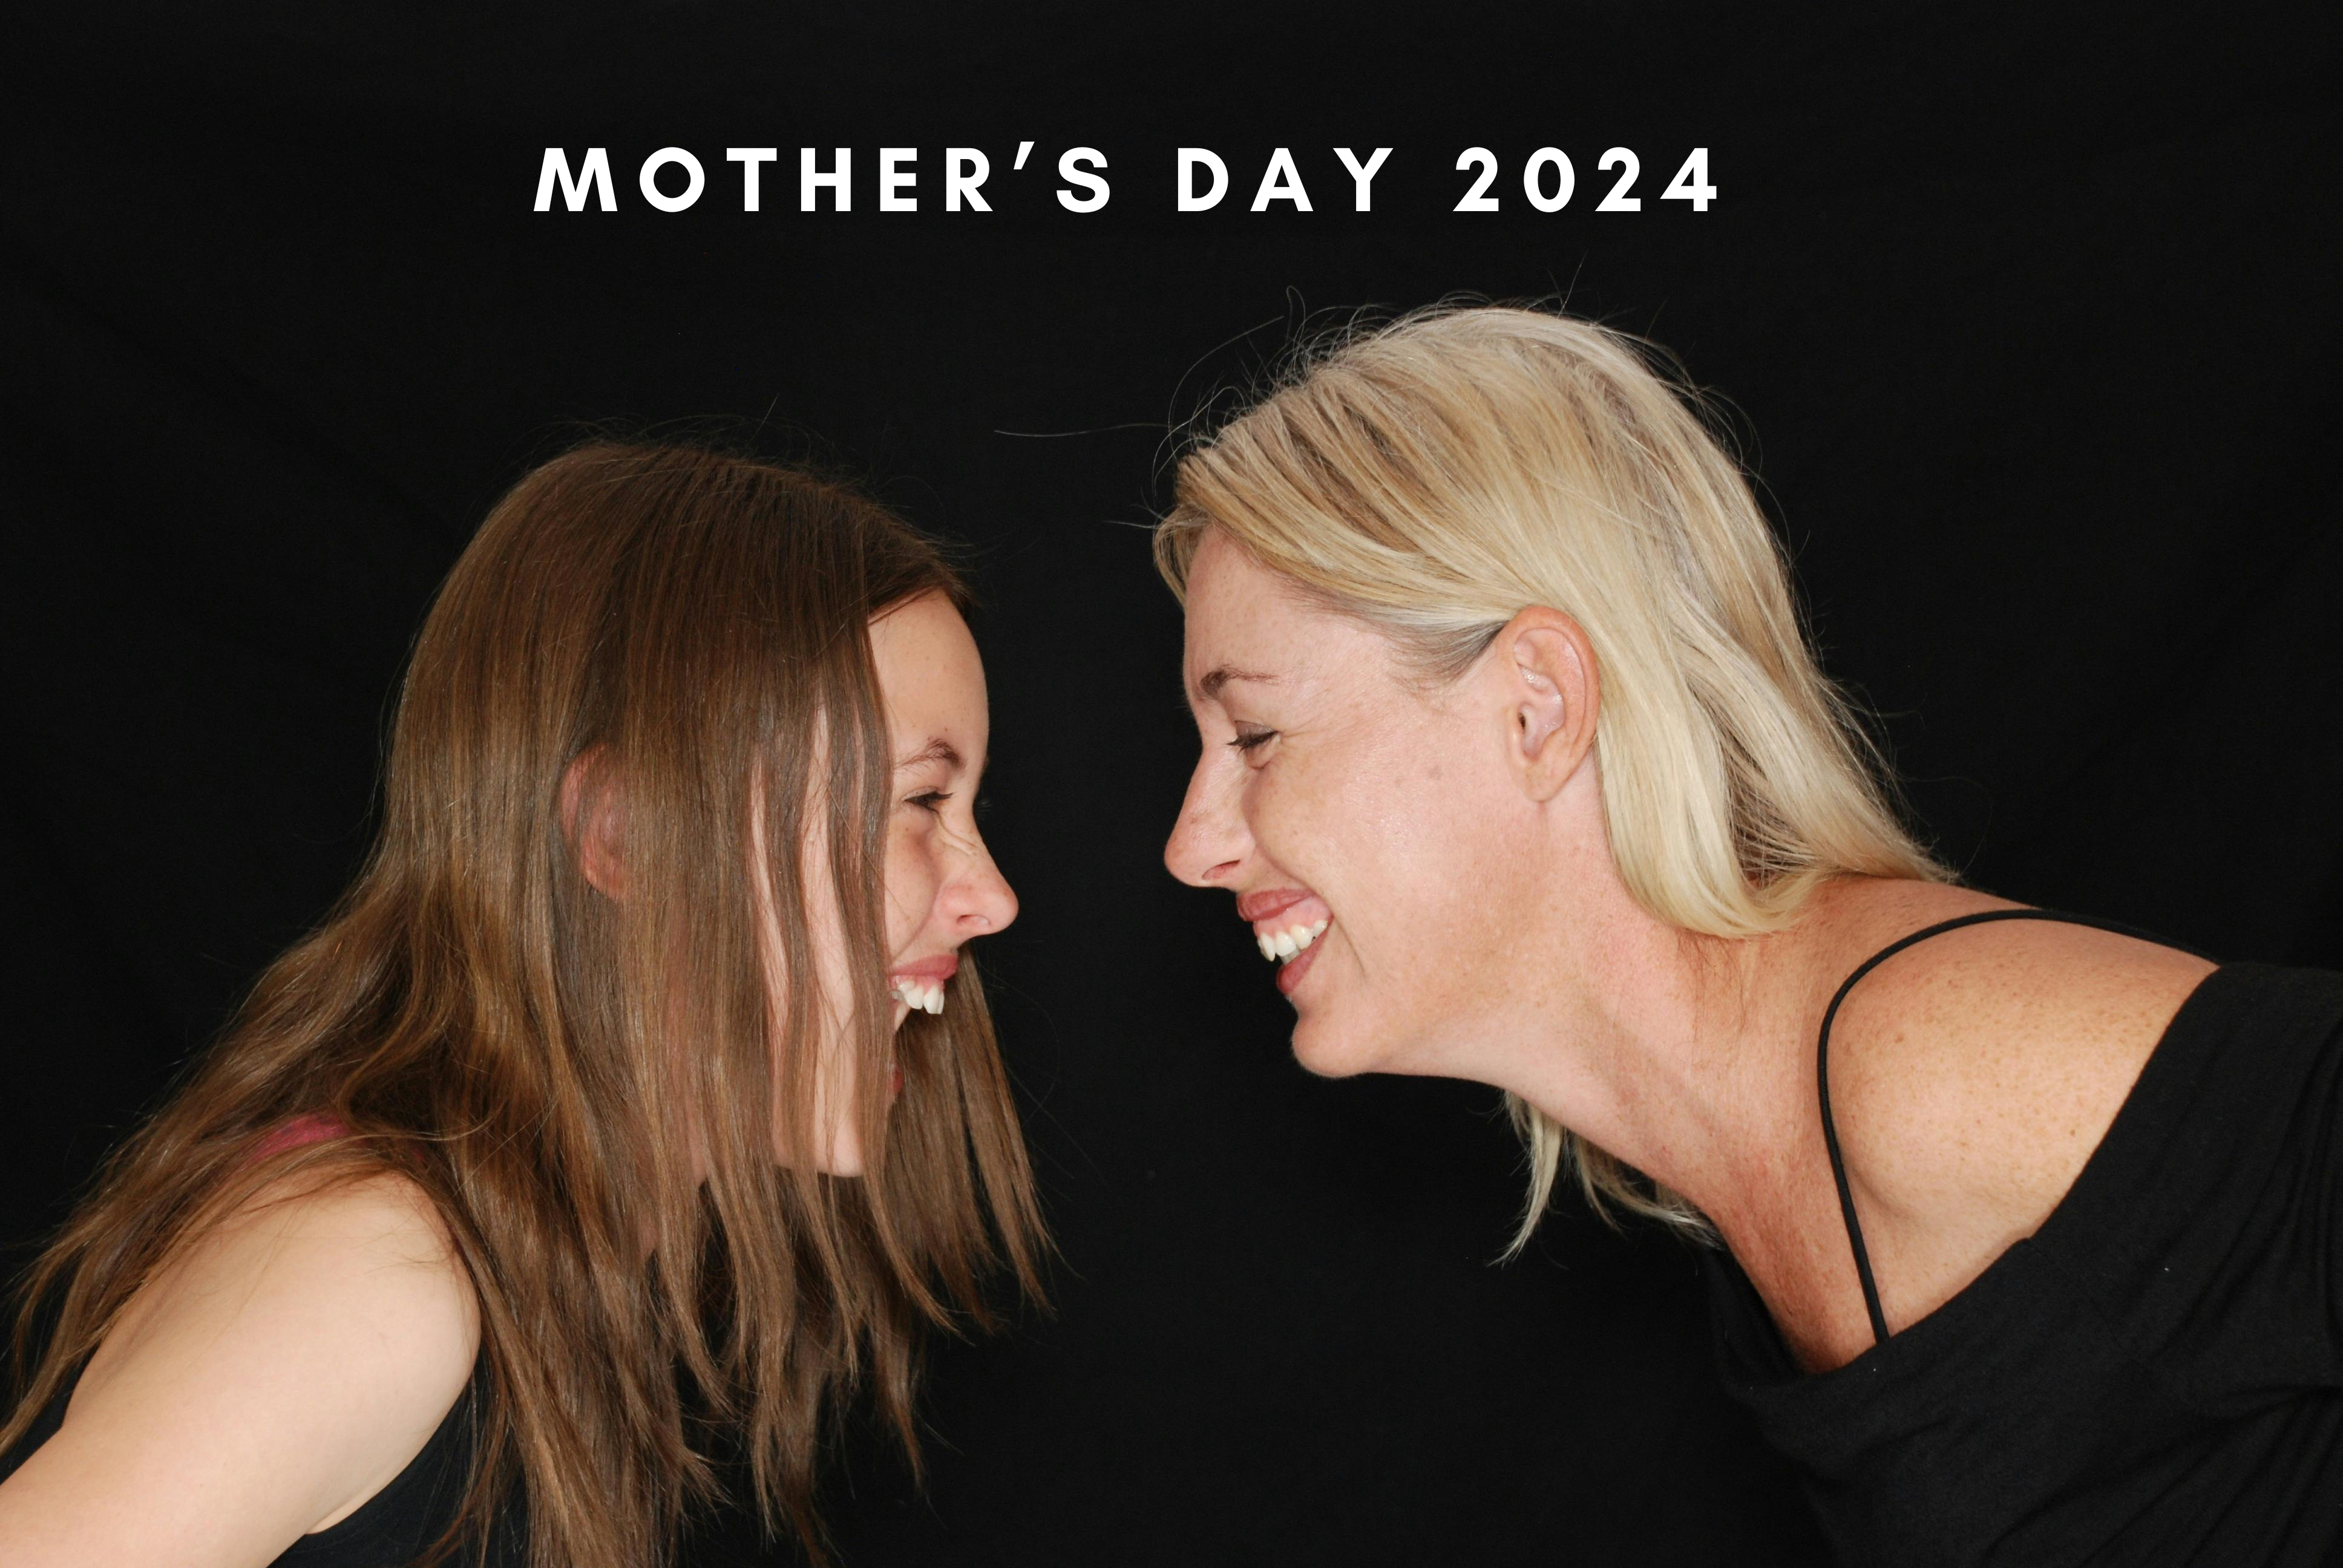 How to Plan a Memorable Mother's Day in 2024